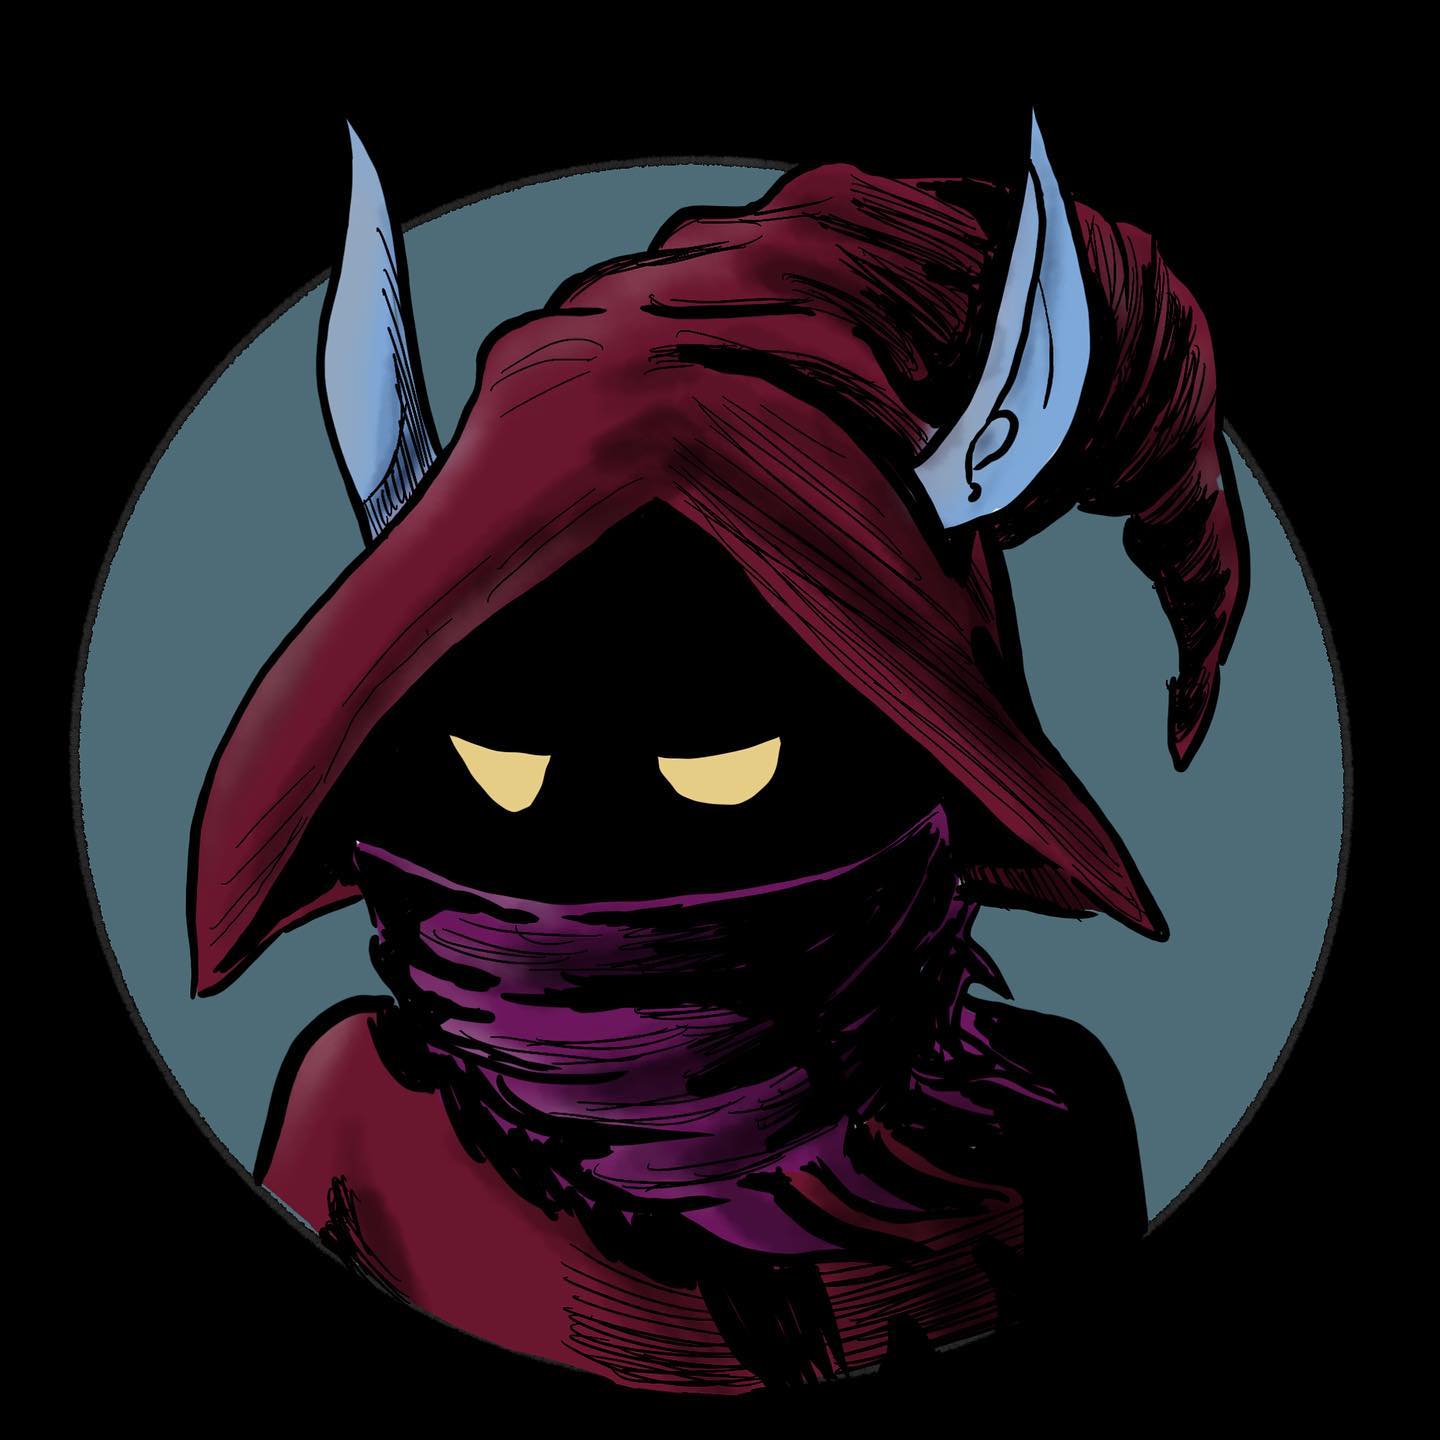 Another night in quarantine, another He-Man character sketched in Procreate. This time, Orko. 
________________
#quarantineart #hemanorko #procreateart #digitalart #hemanandthemastersoftheuniverse